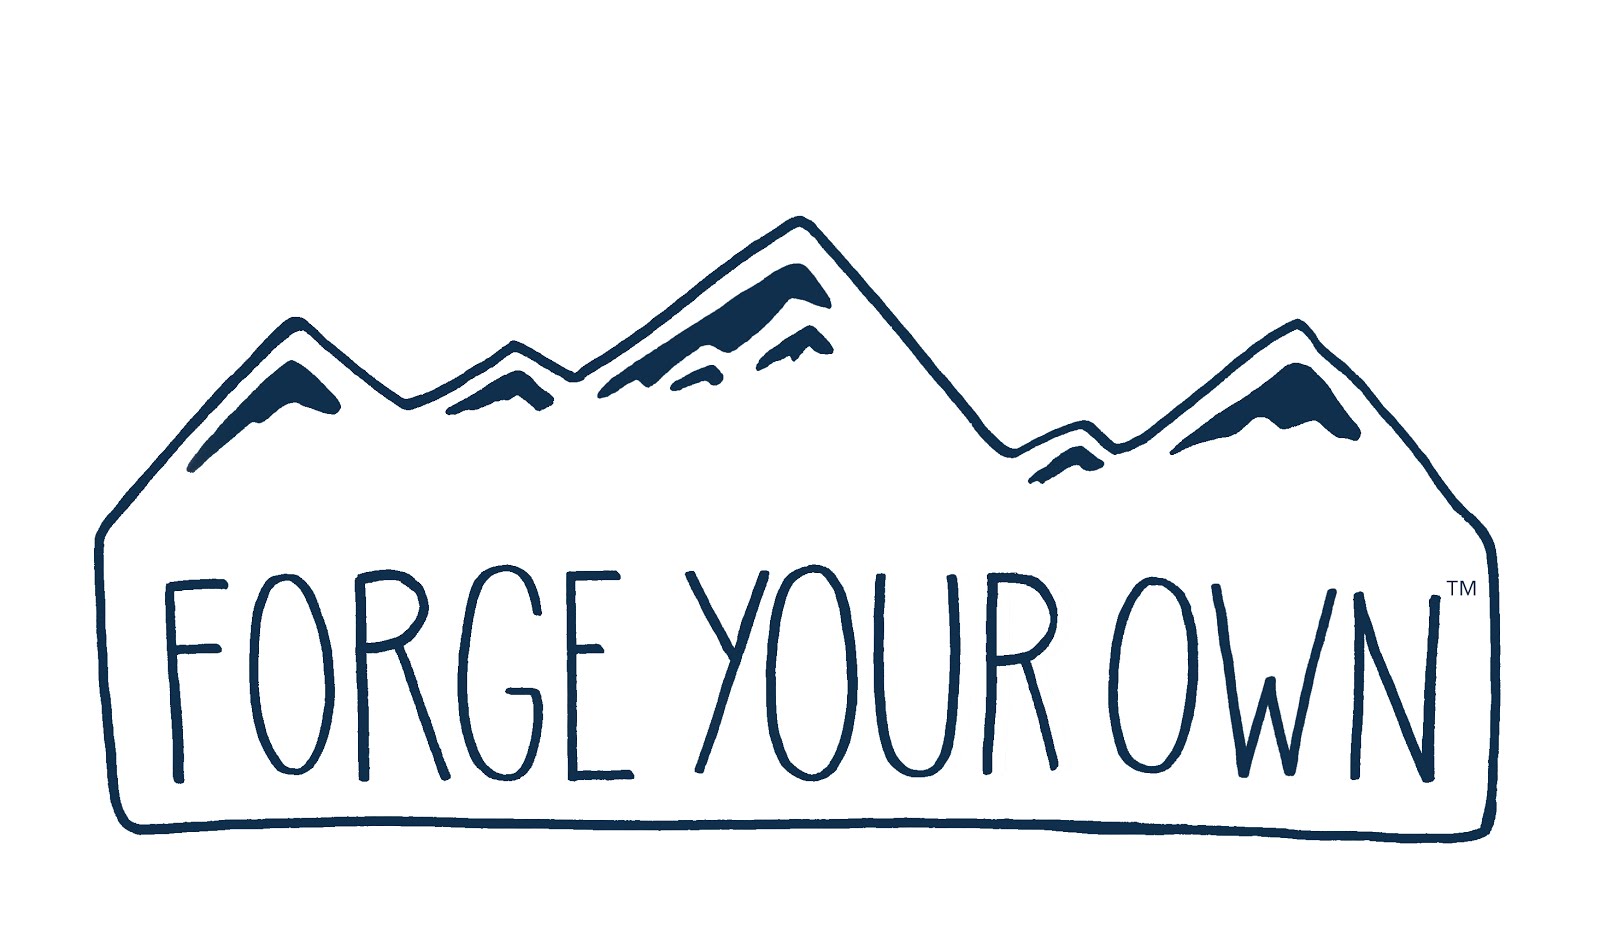 Forge Your Own